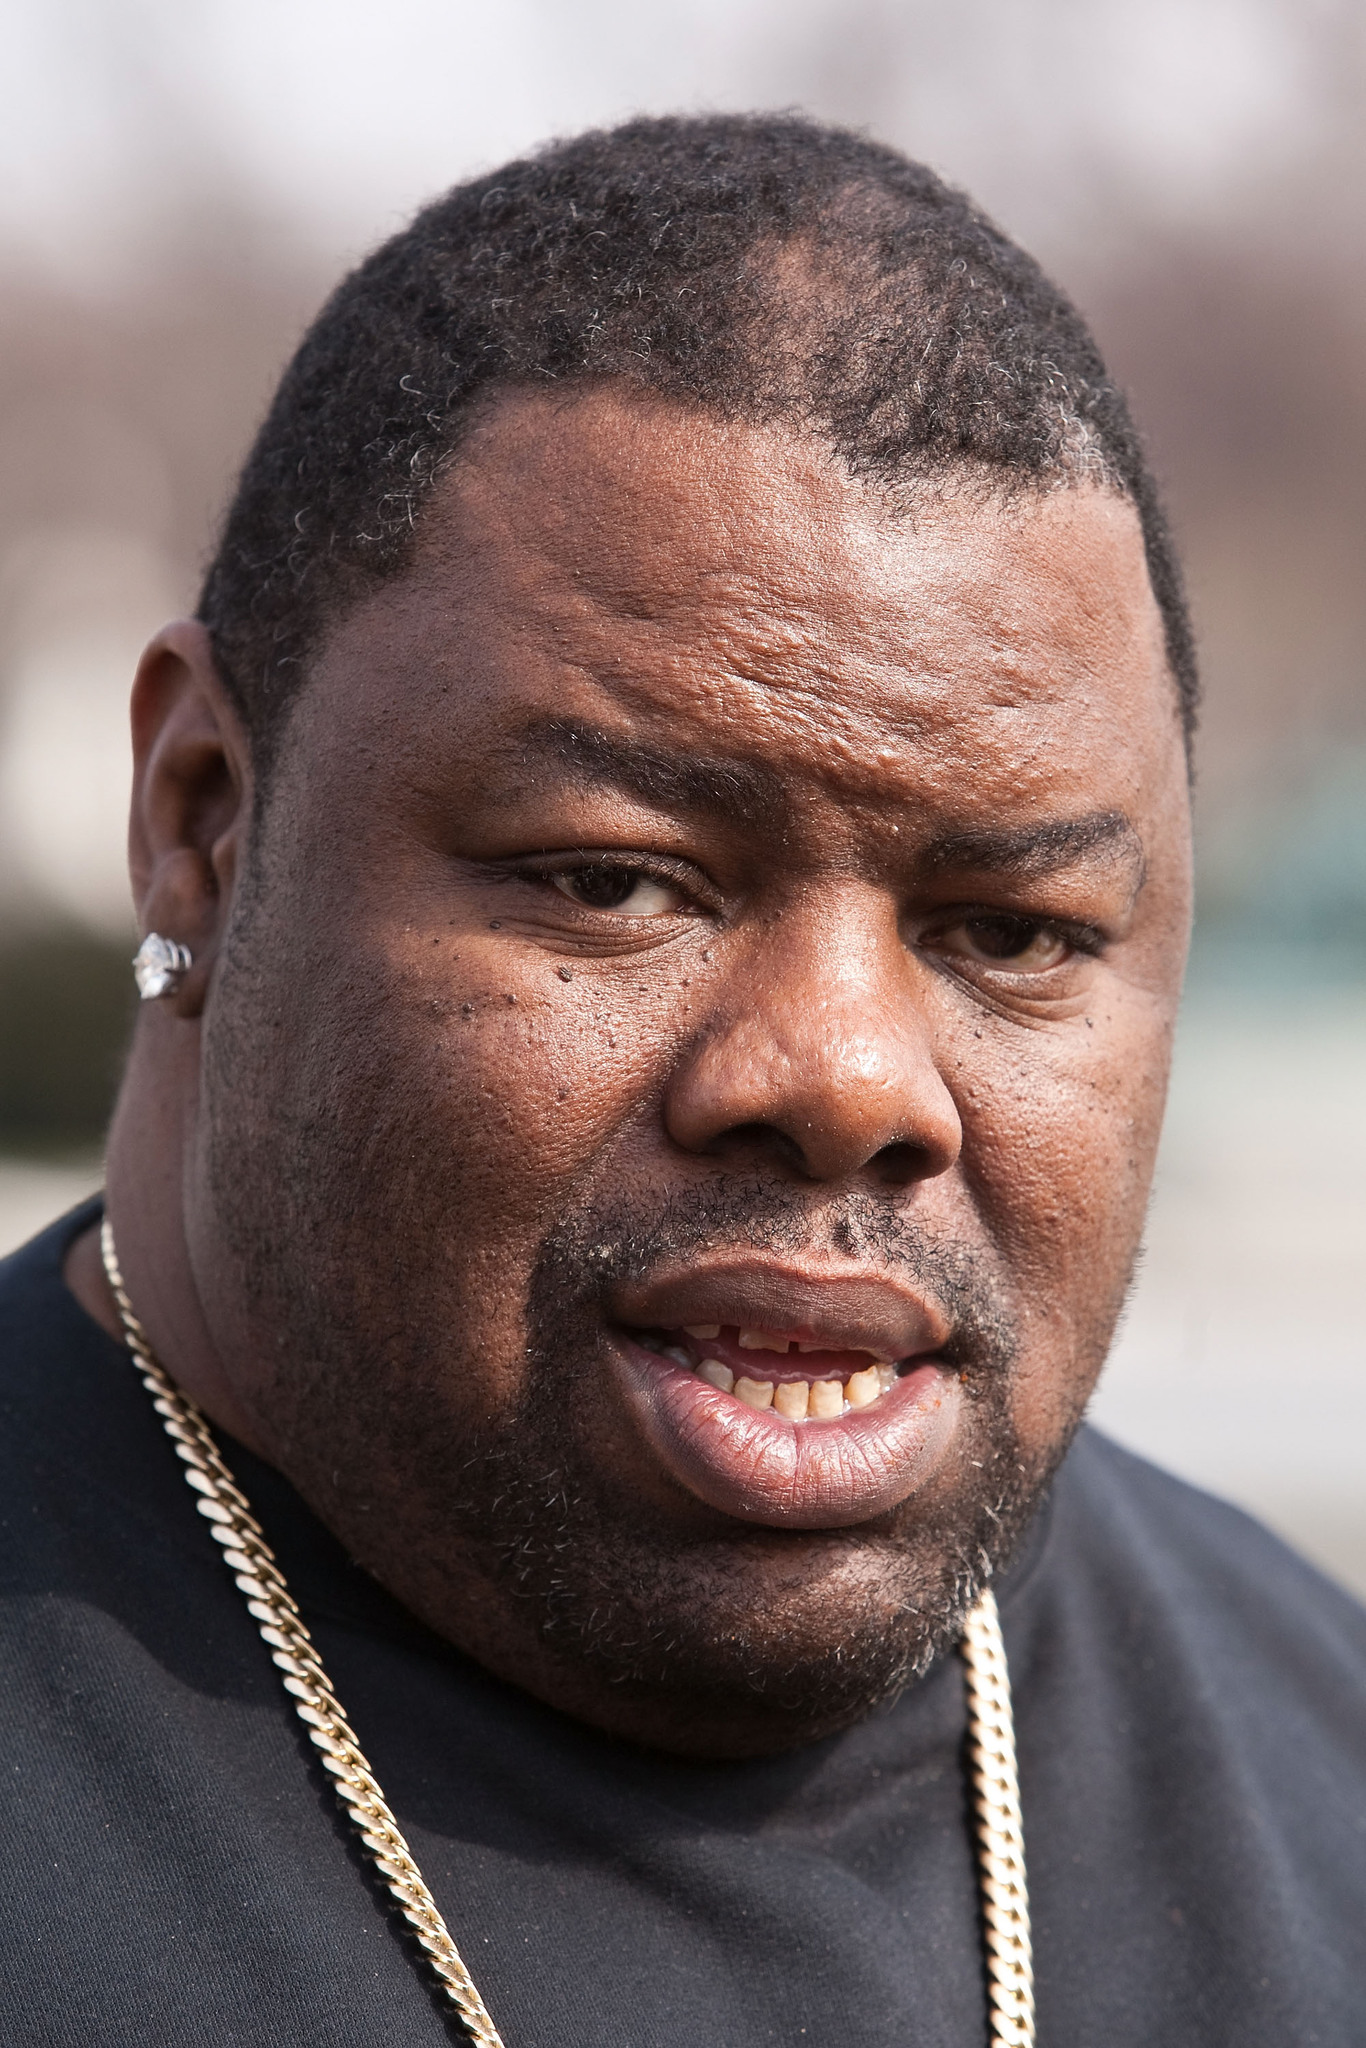 The 59-year old son of father (?) and mother(?) Biz Markie in 2023 photo. Biz Markie earned a  million dollar salary - leaving the net worth at  million in 2023